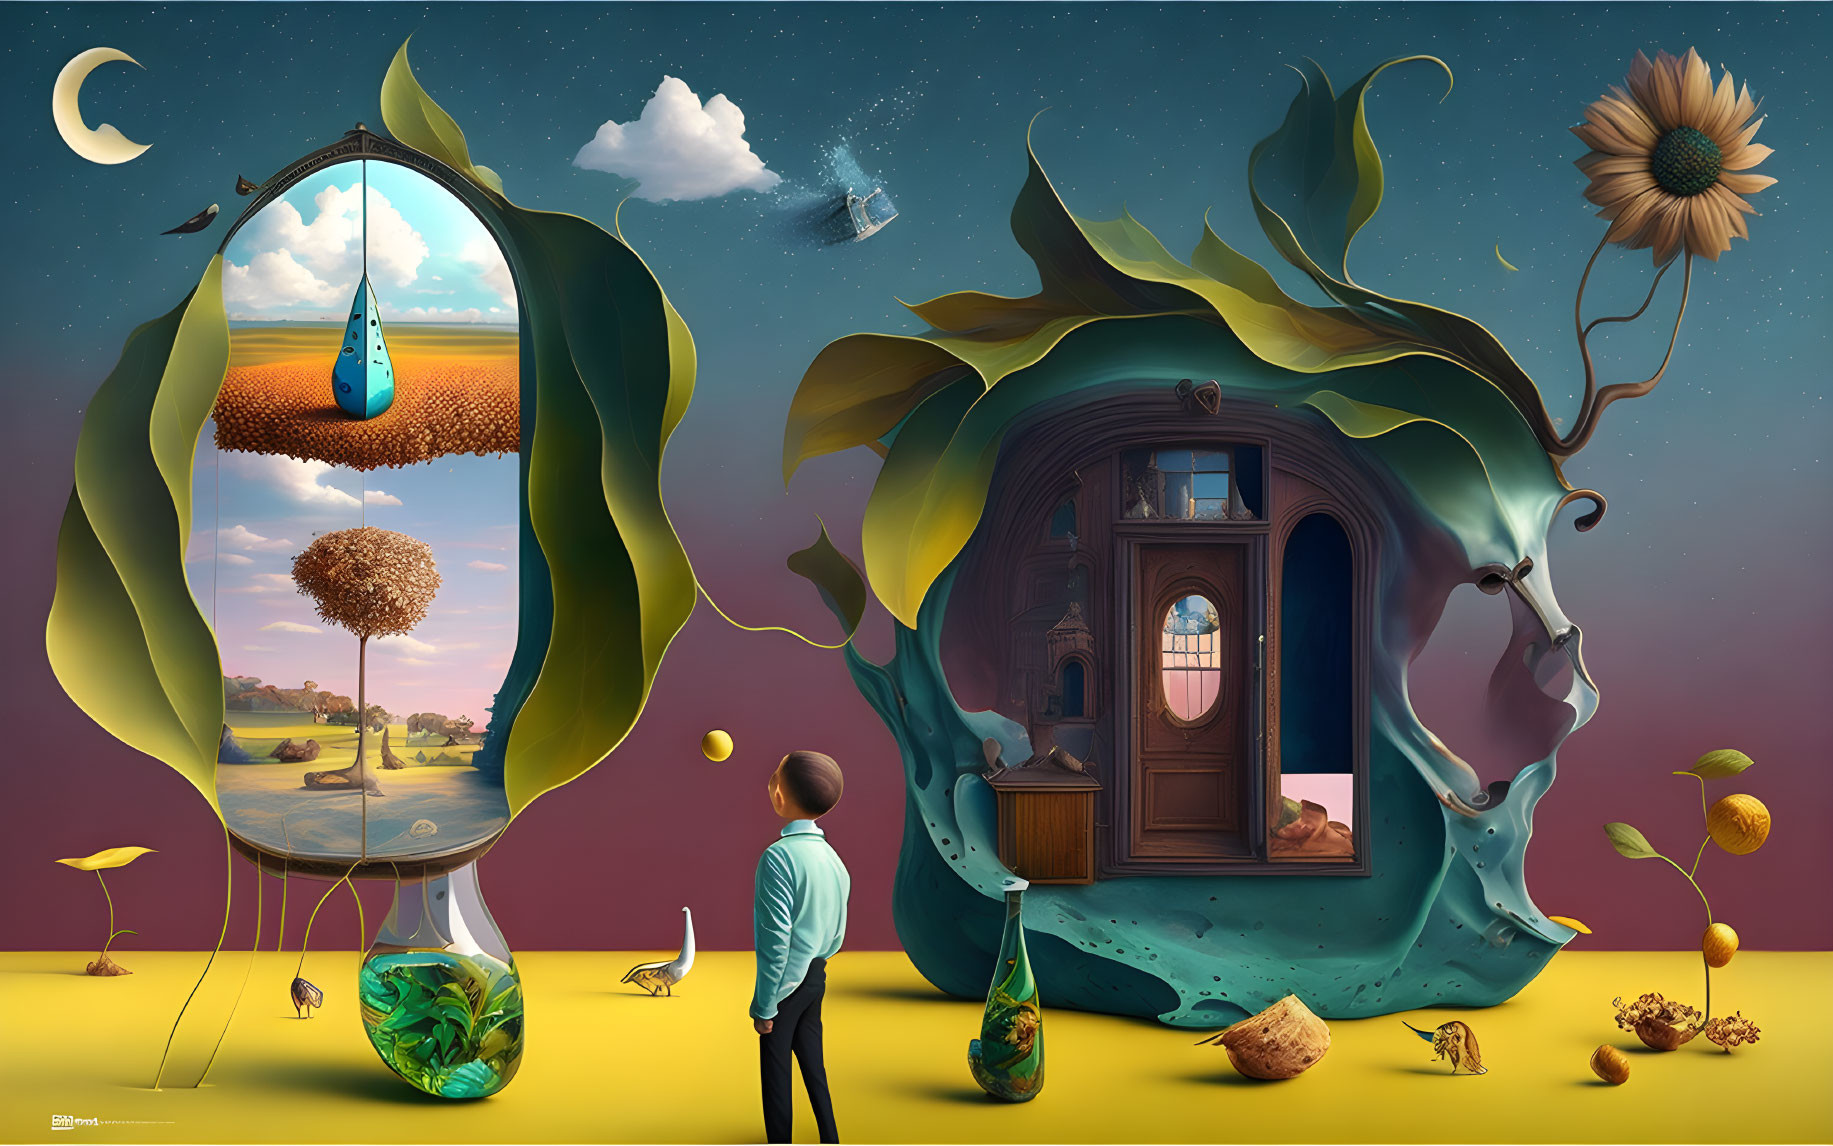 Surreal Artwork Featuring Nature, Space, and Domestic Life Blend